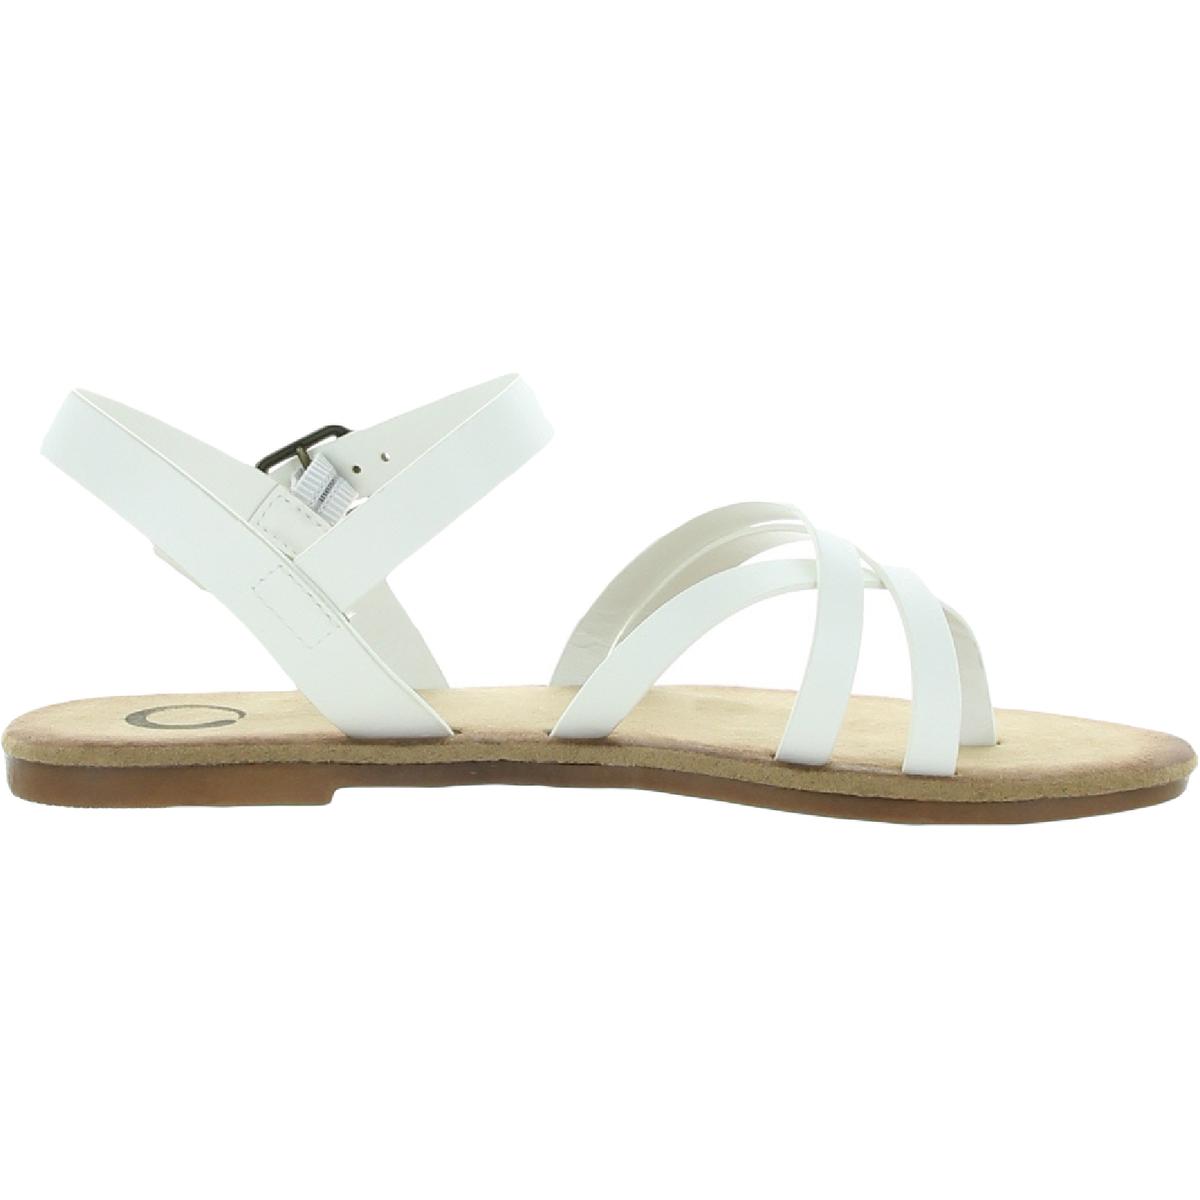 Journee Collection Vasek Womens Strappy Slingback Flat Sandals